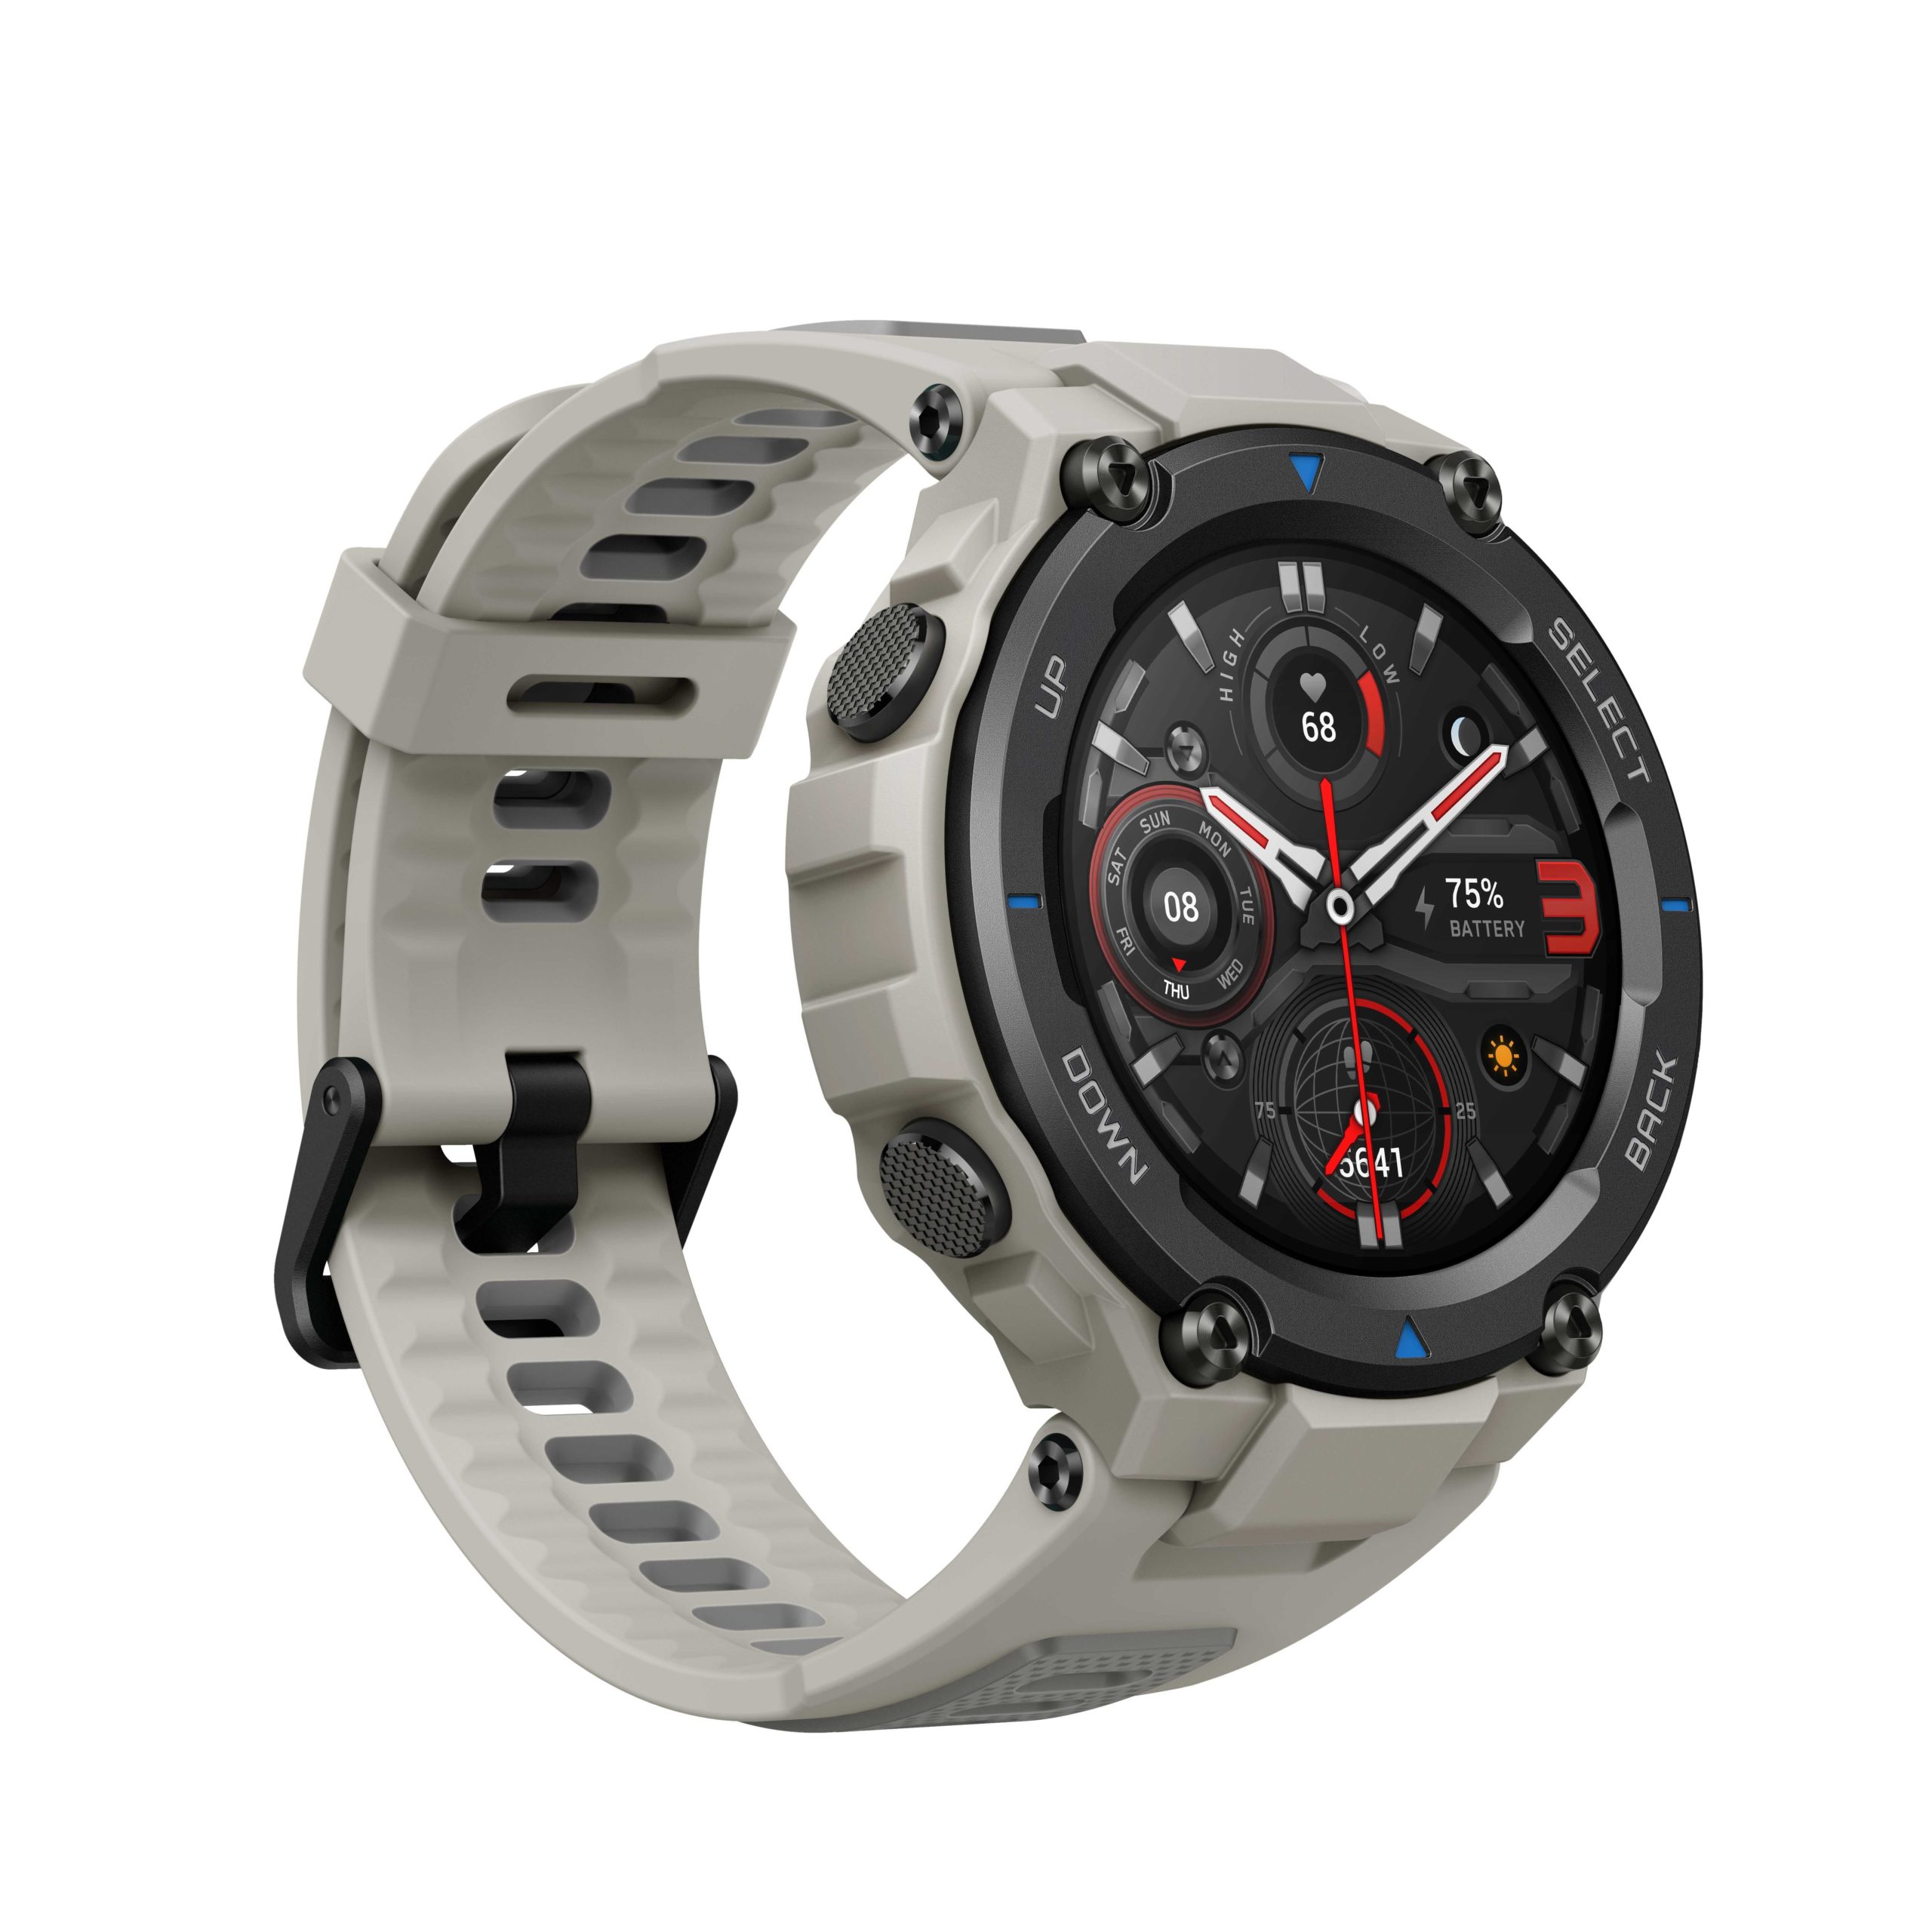 Get ready for the gym with the help from Amazfit smartwatches